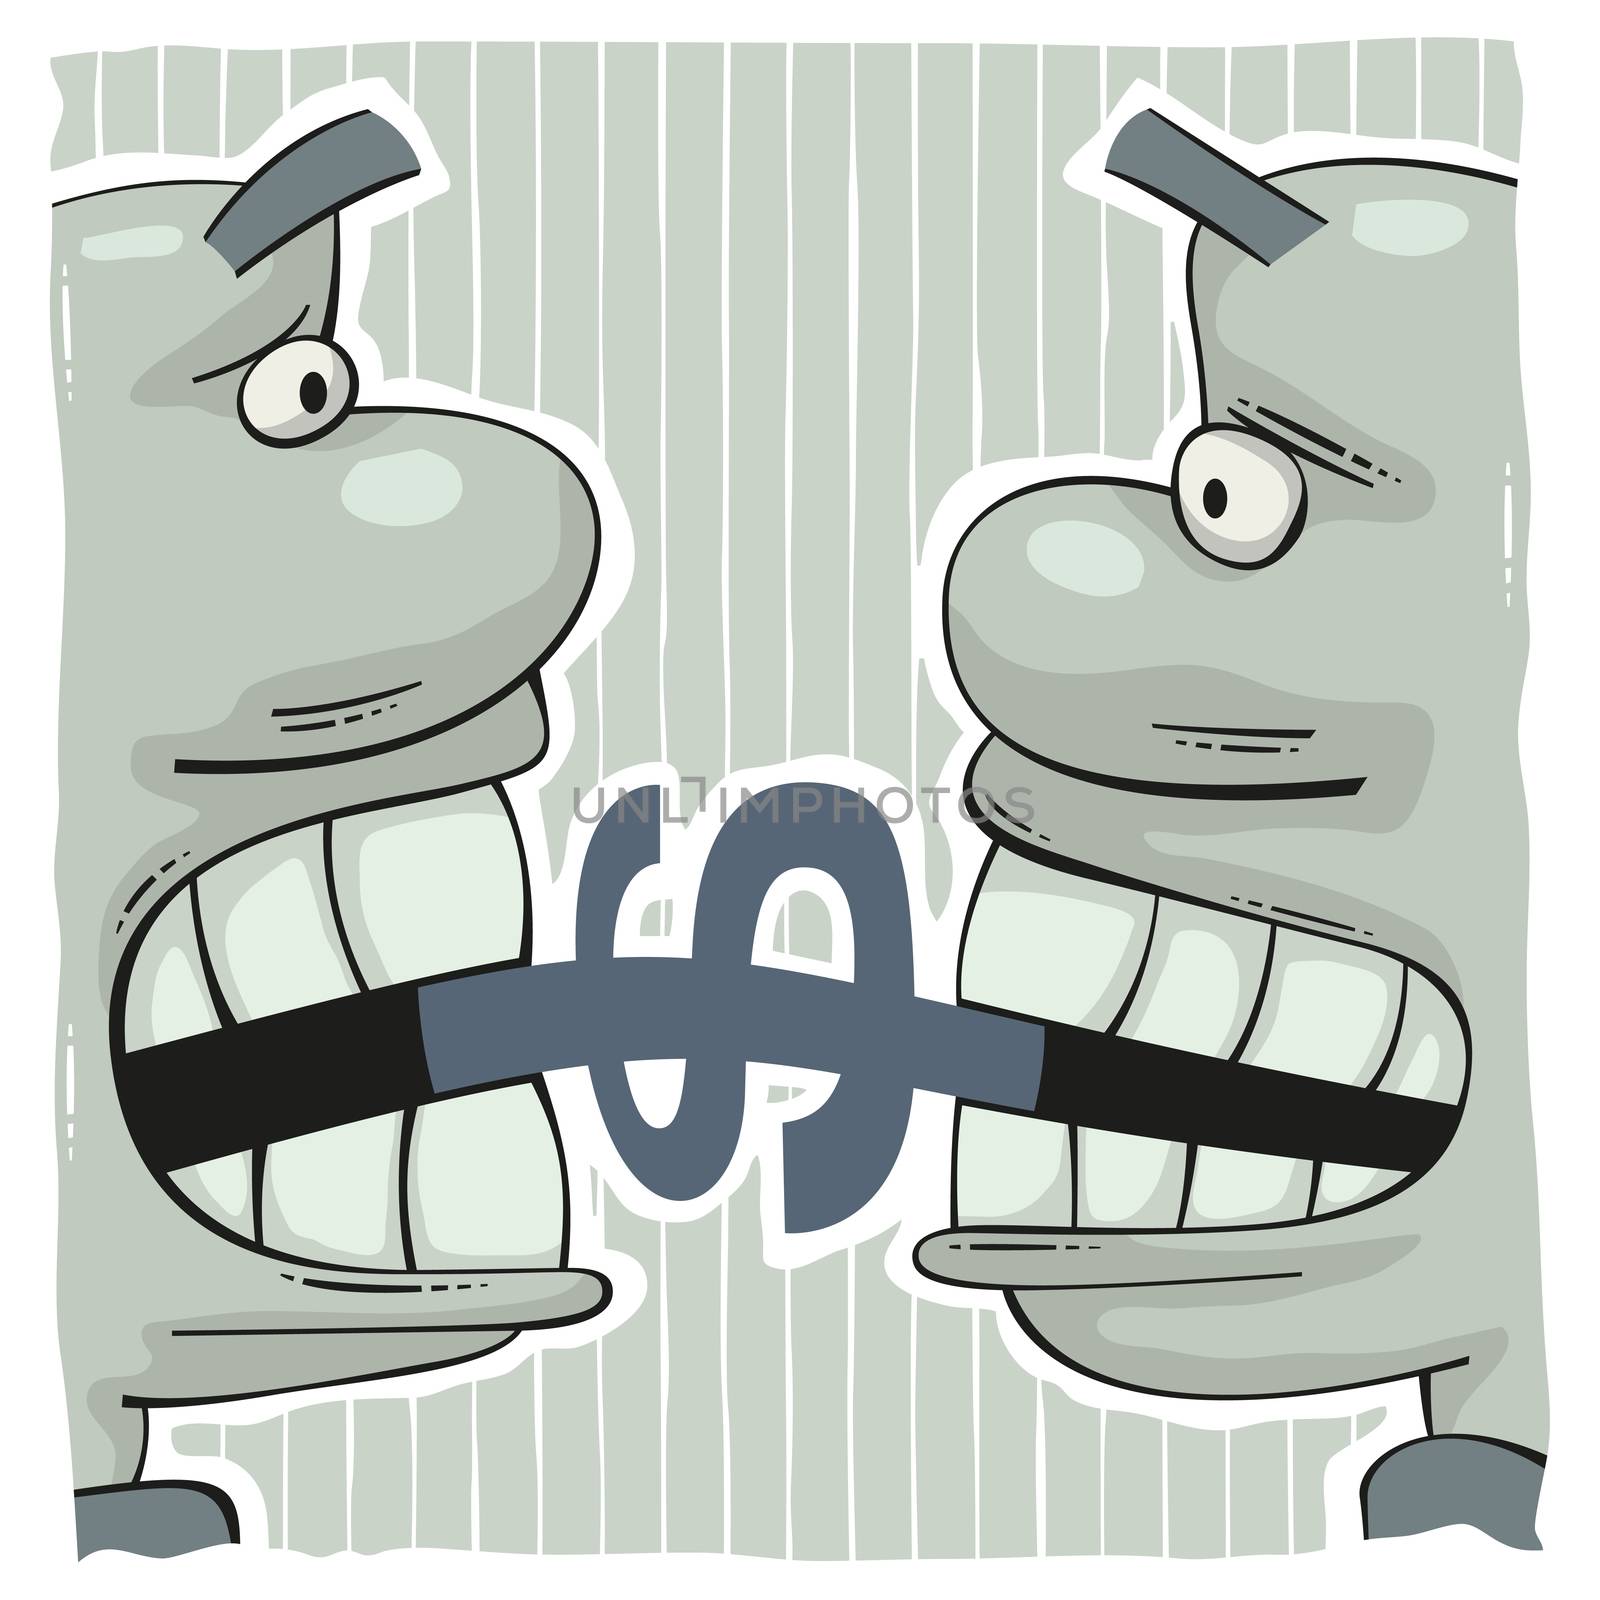 Conflict of two greedy men biting a dollar sign with big teeth